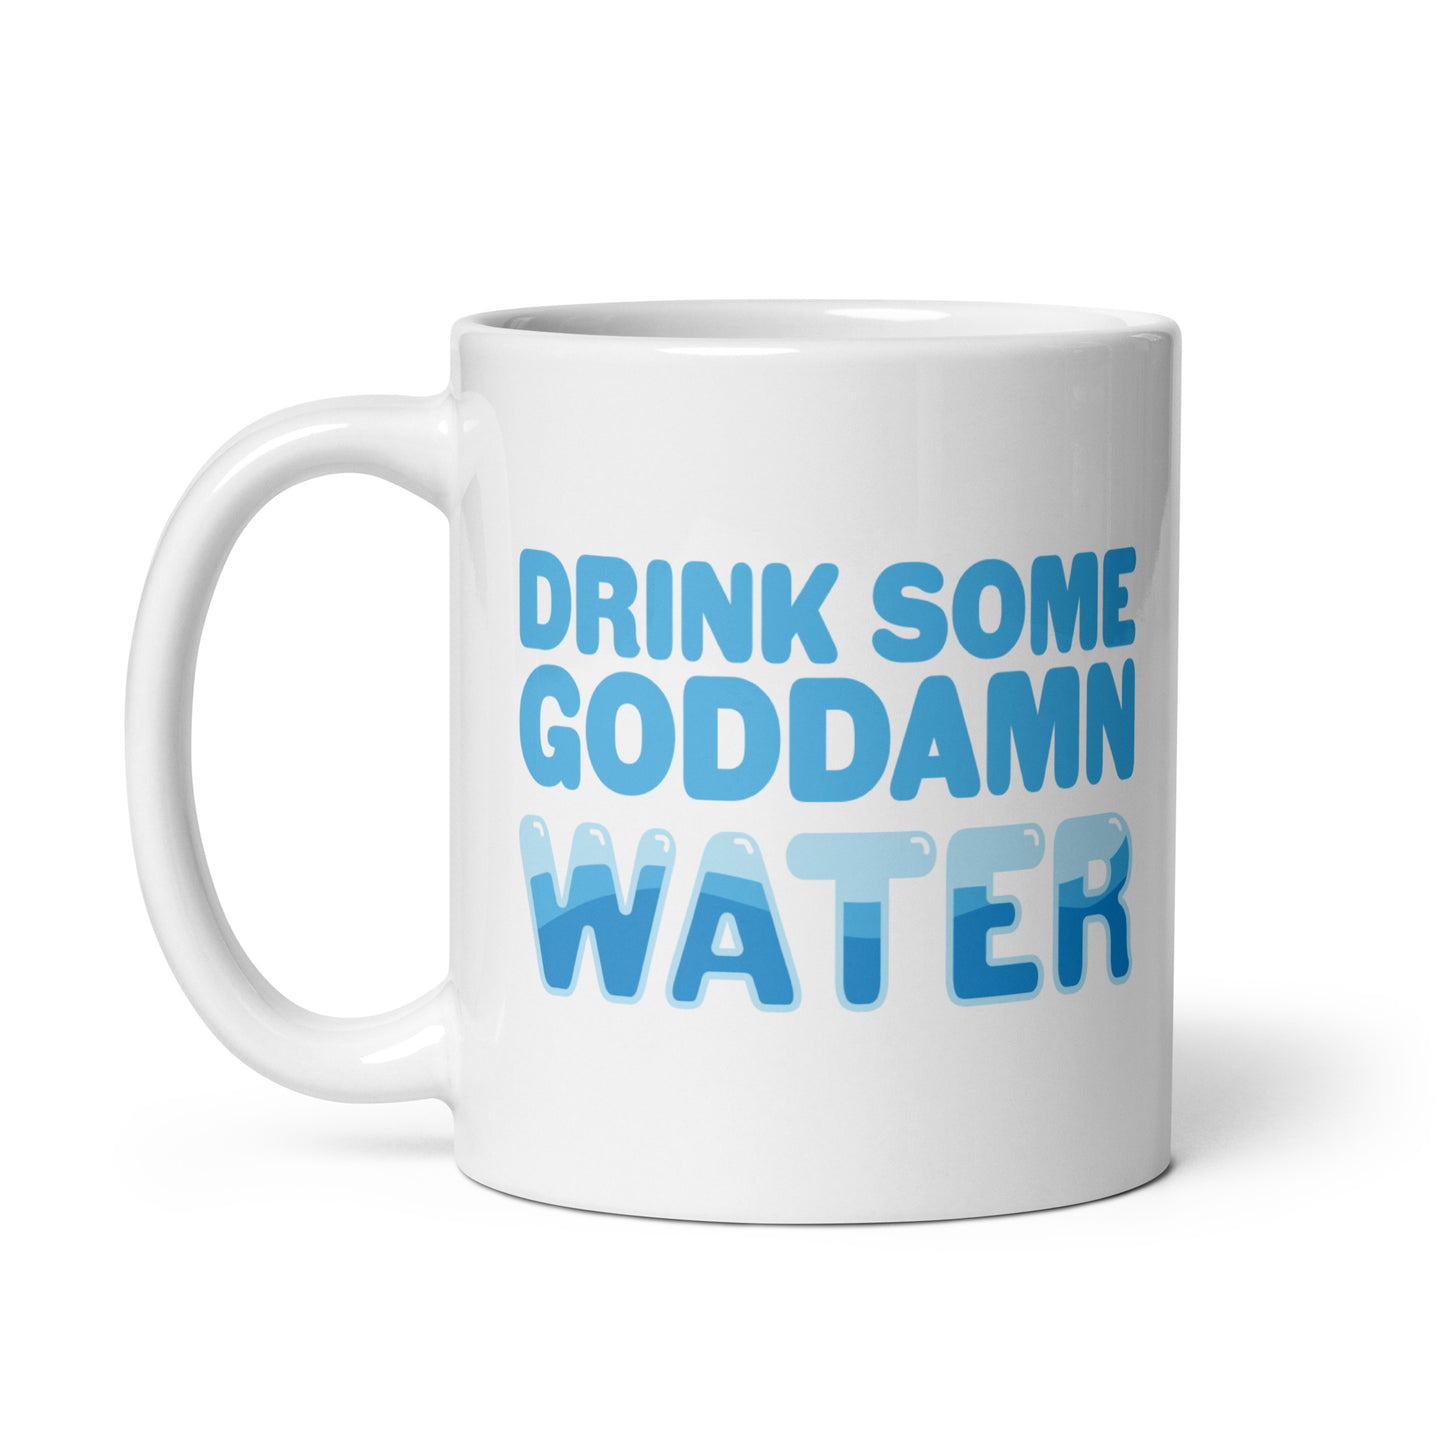 A white 11 ounce ceramic mug with blue bubble letters that read "Drink some goddamn water"